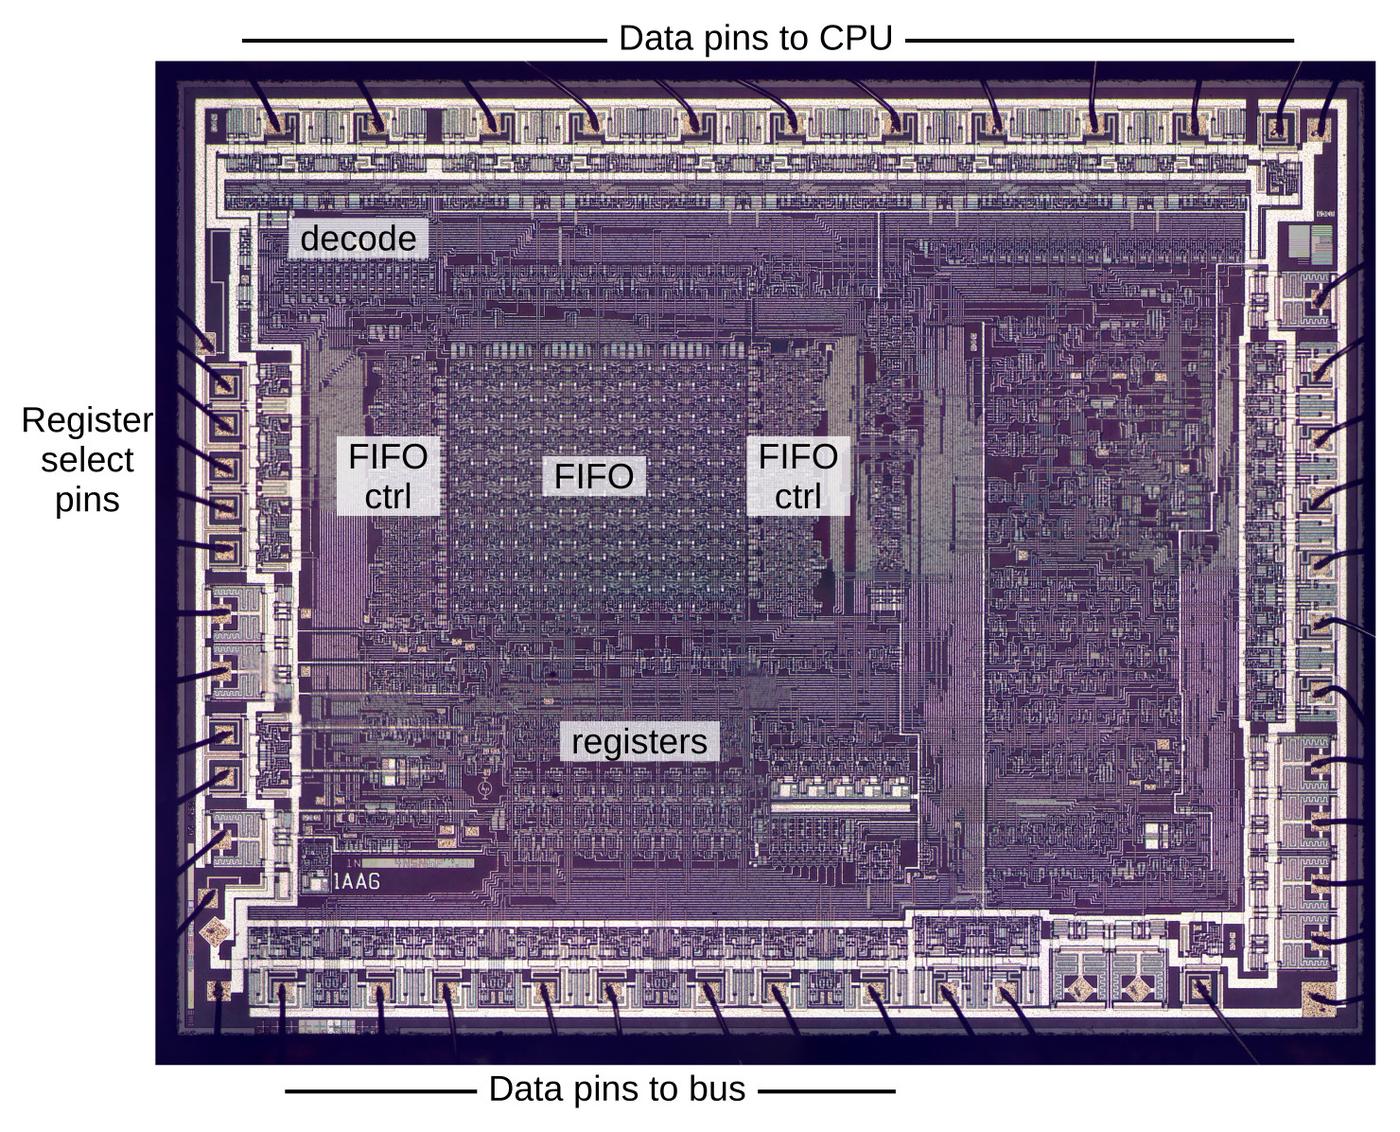 The PHI die with some functional blocks labeled,